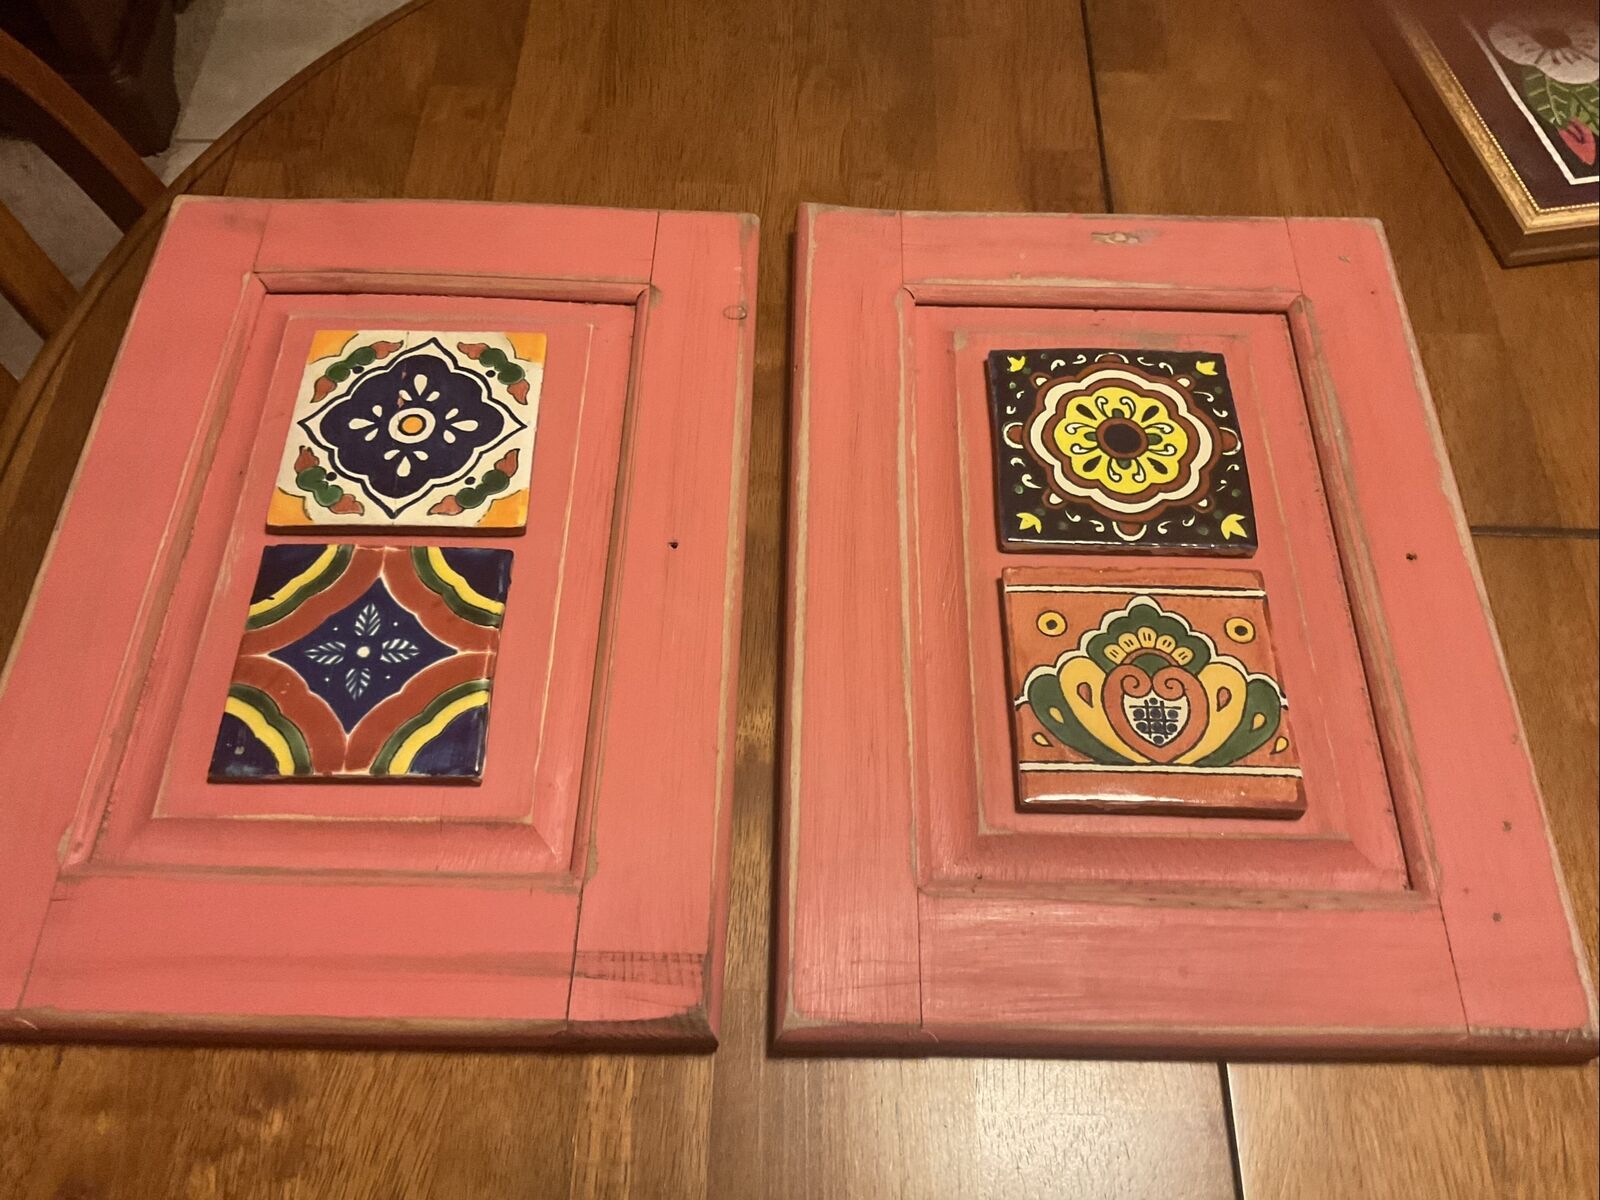 VTG PAIR FRAMED WOODEN HAND CRAFTED PAINTED TILED DECOR 16”x11”